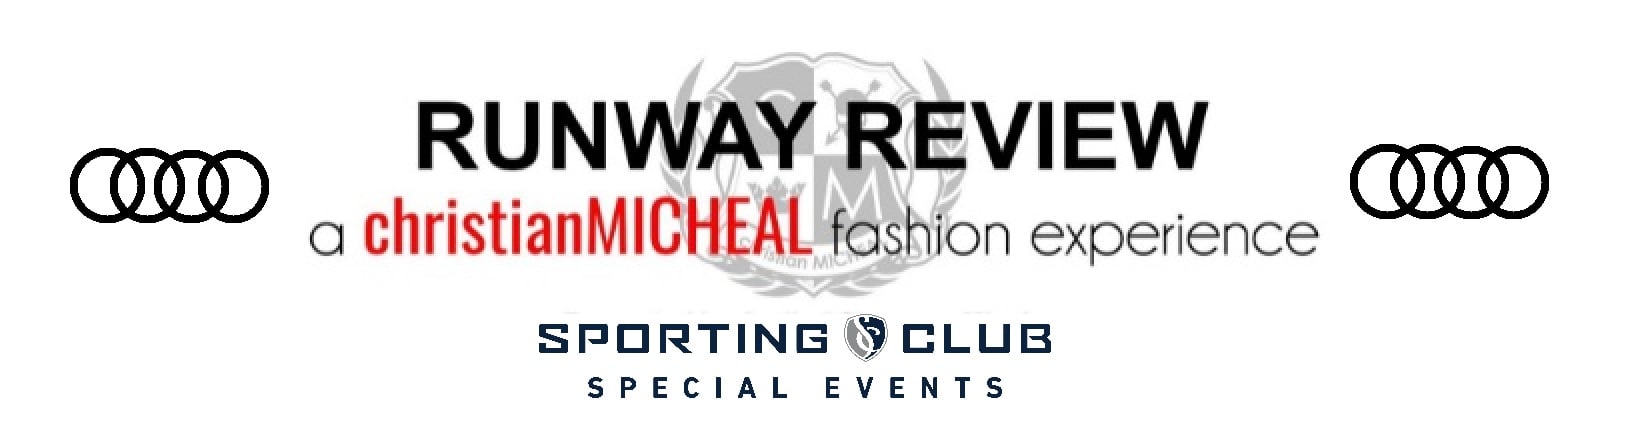 Runway Review KC | About